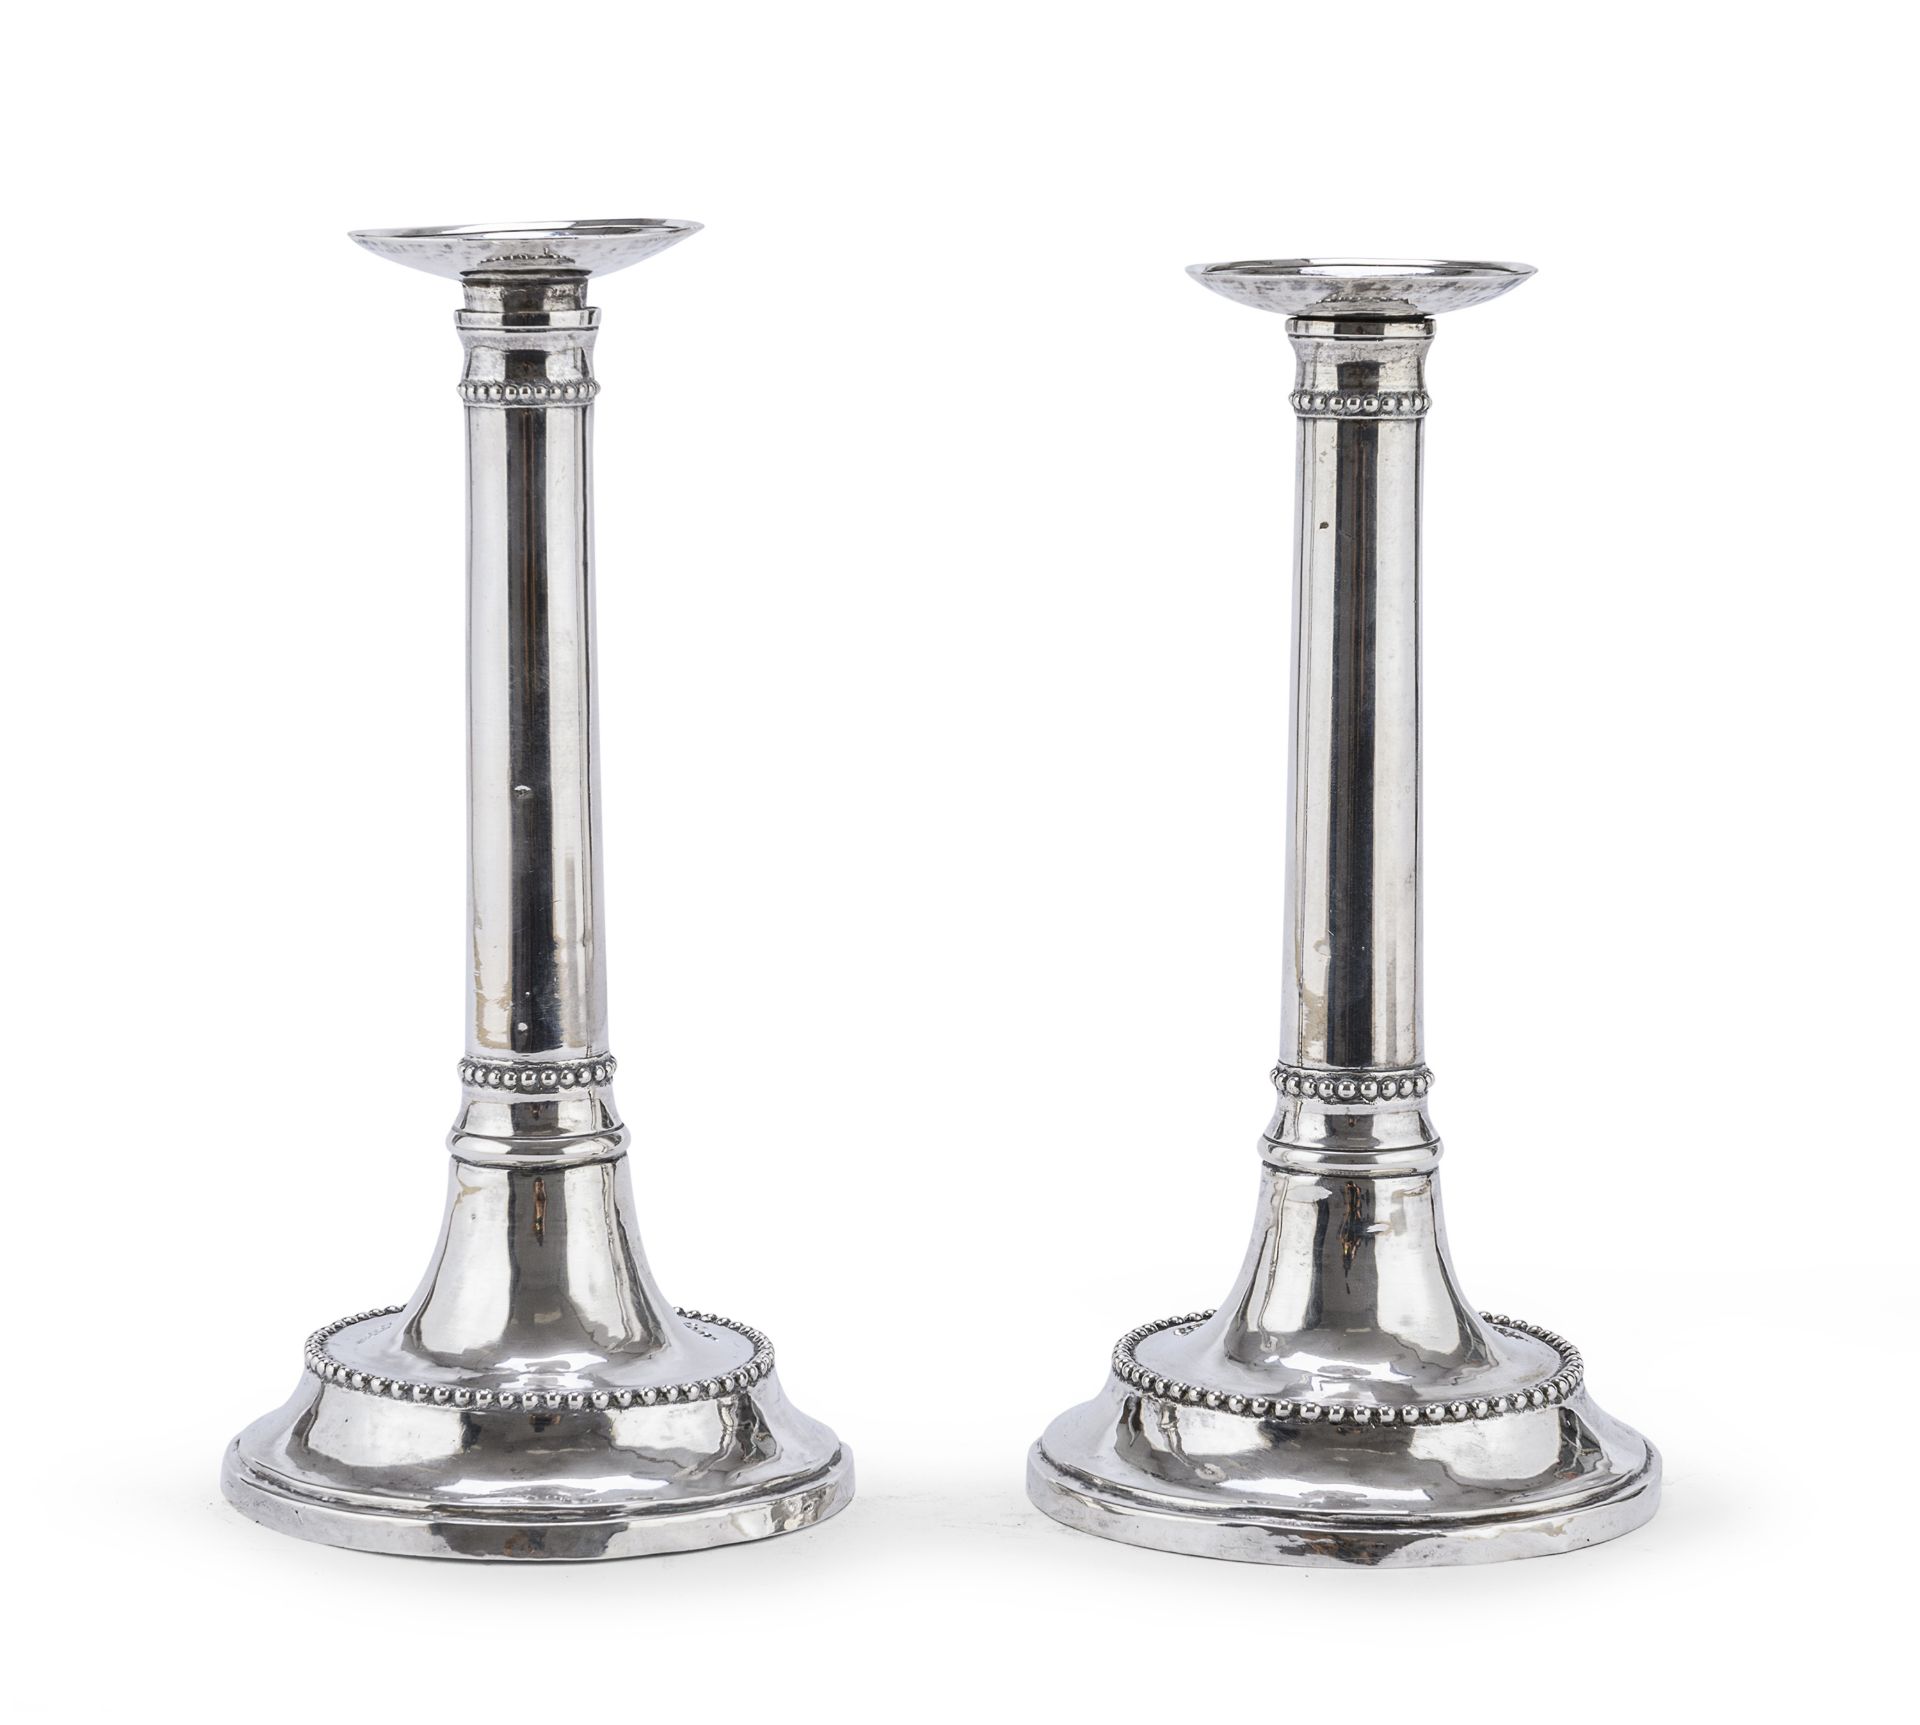 PAIR OF SILVER CANDLESTICKS NAPLES END OF THE 18TH CENTURY